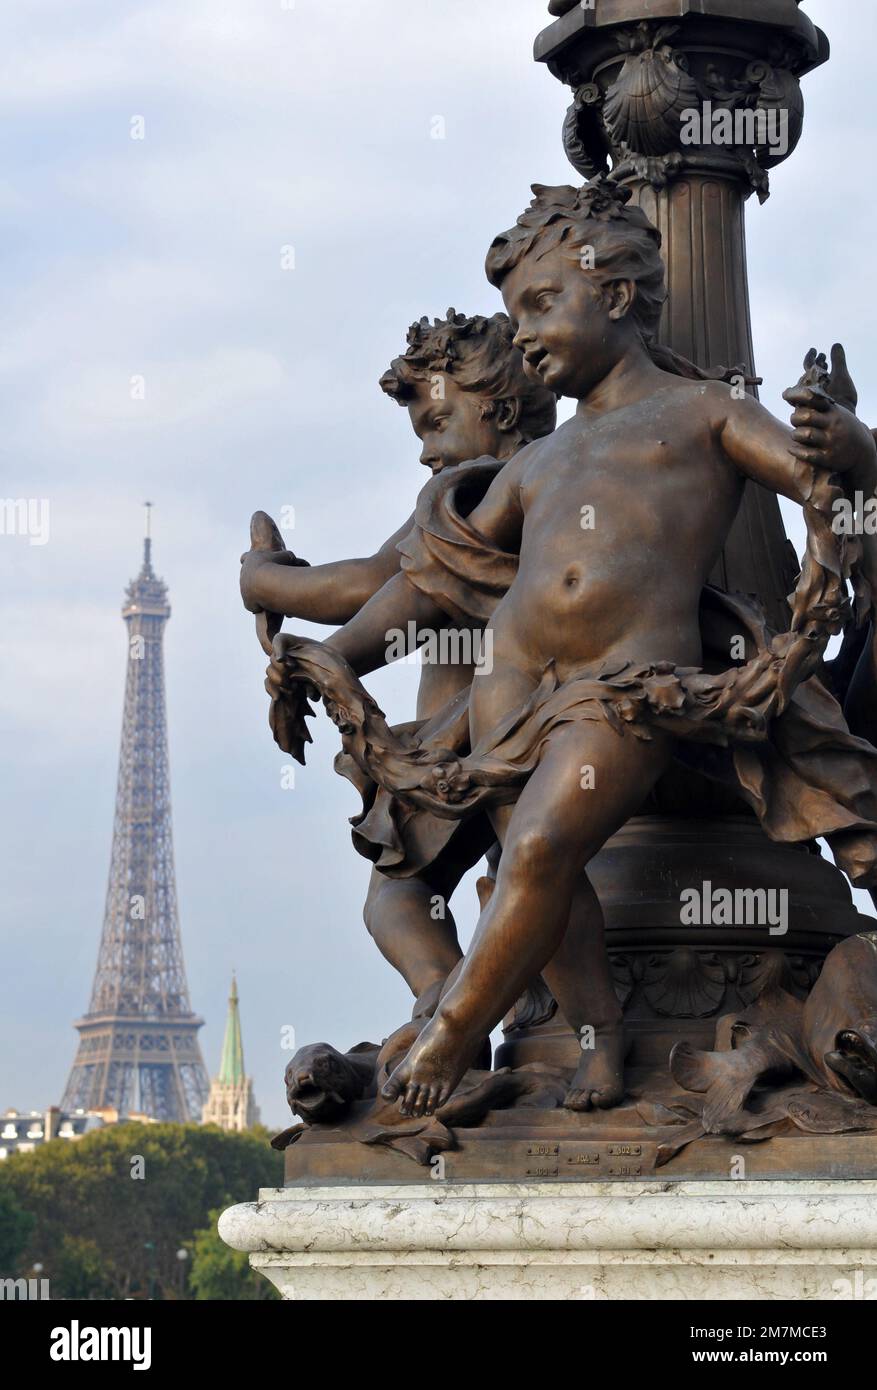 The Eiffel Tower stands in the background behind bronze sculptures at the base of a lamp on the Pont Alexandre III bridge in Paris. Stock Photo